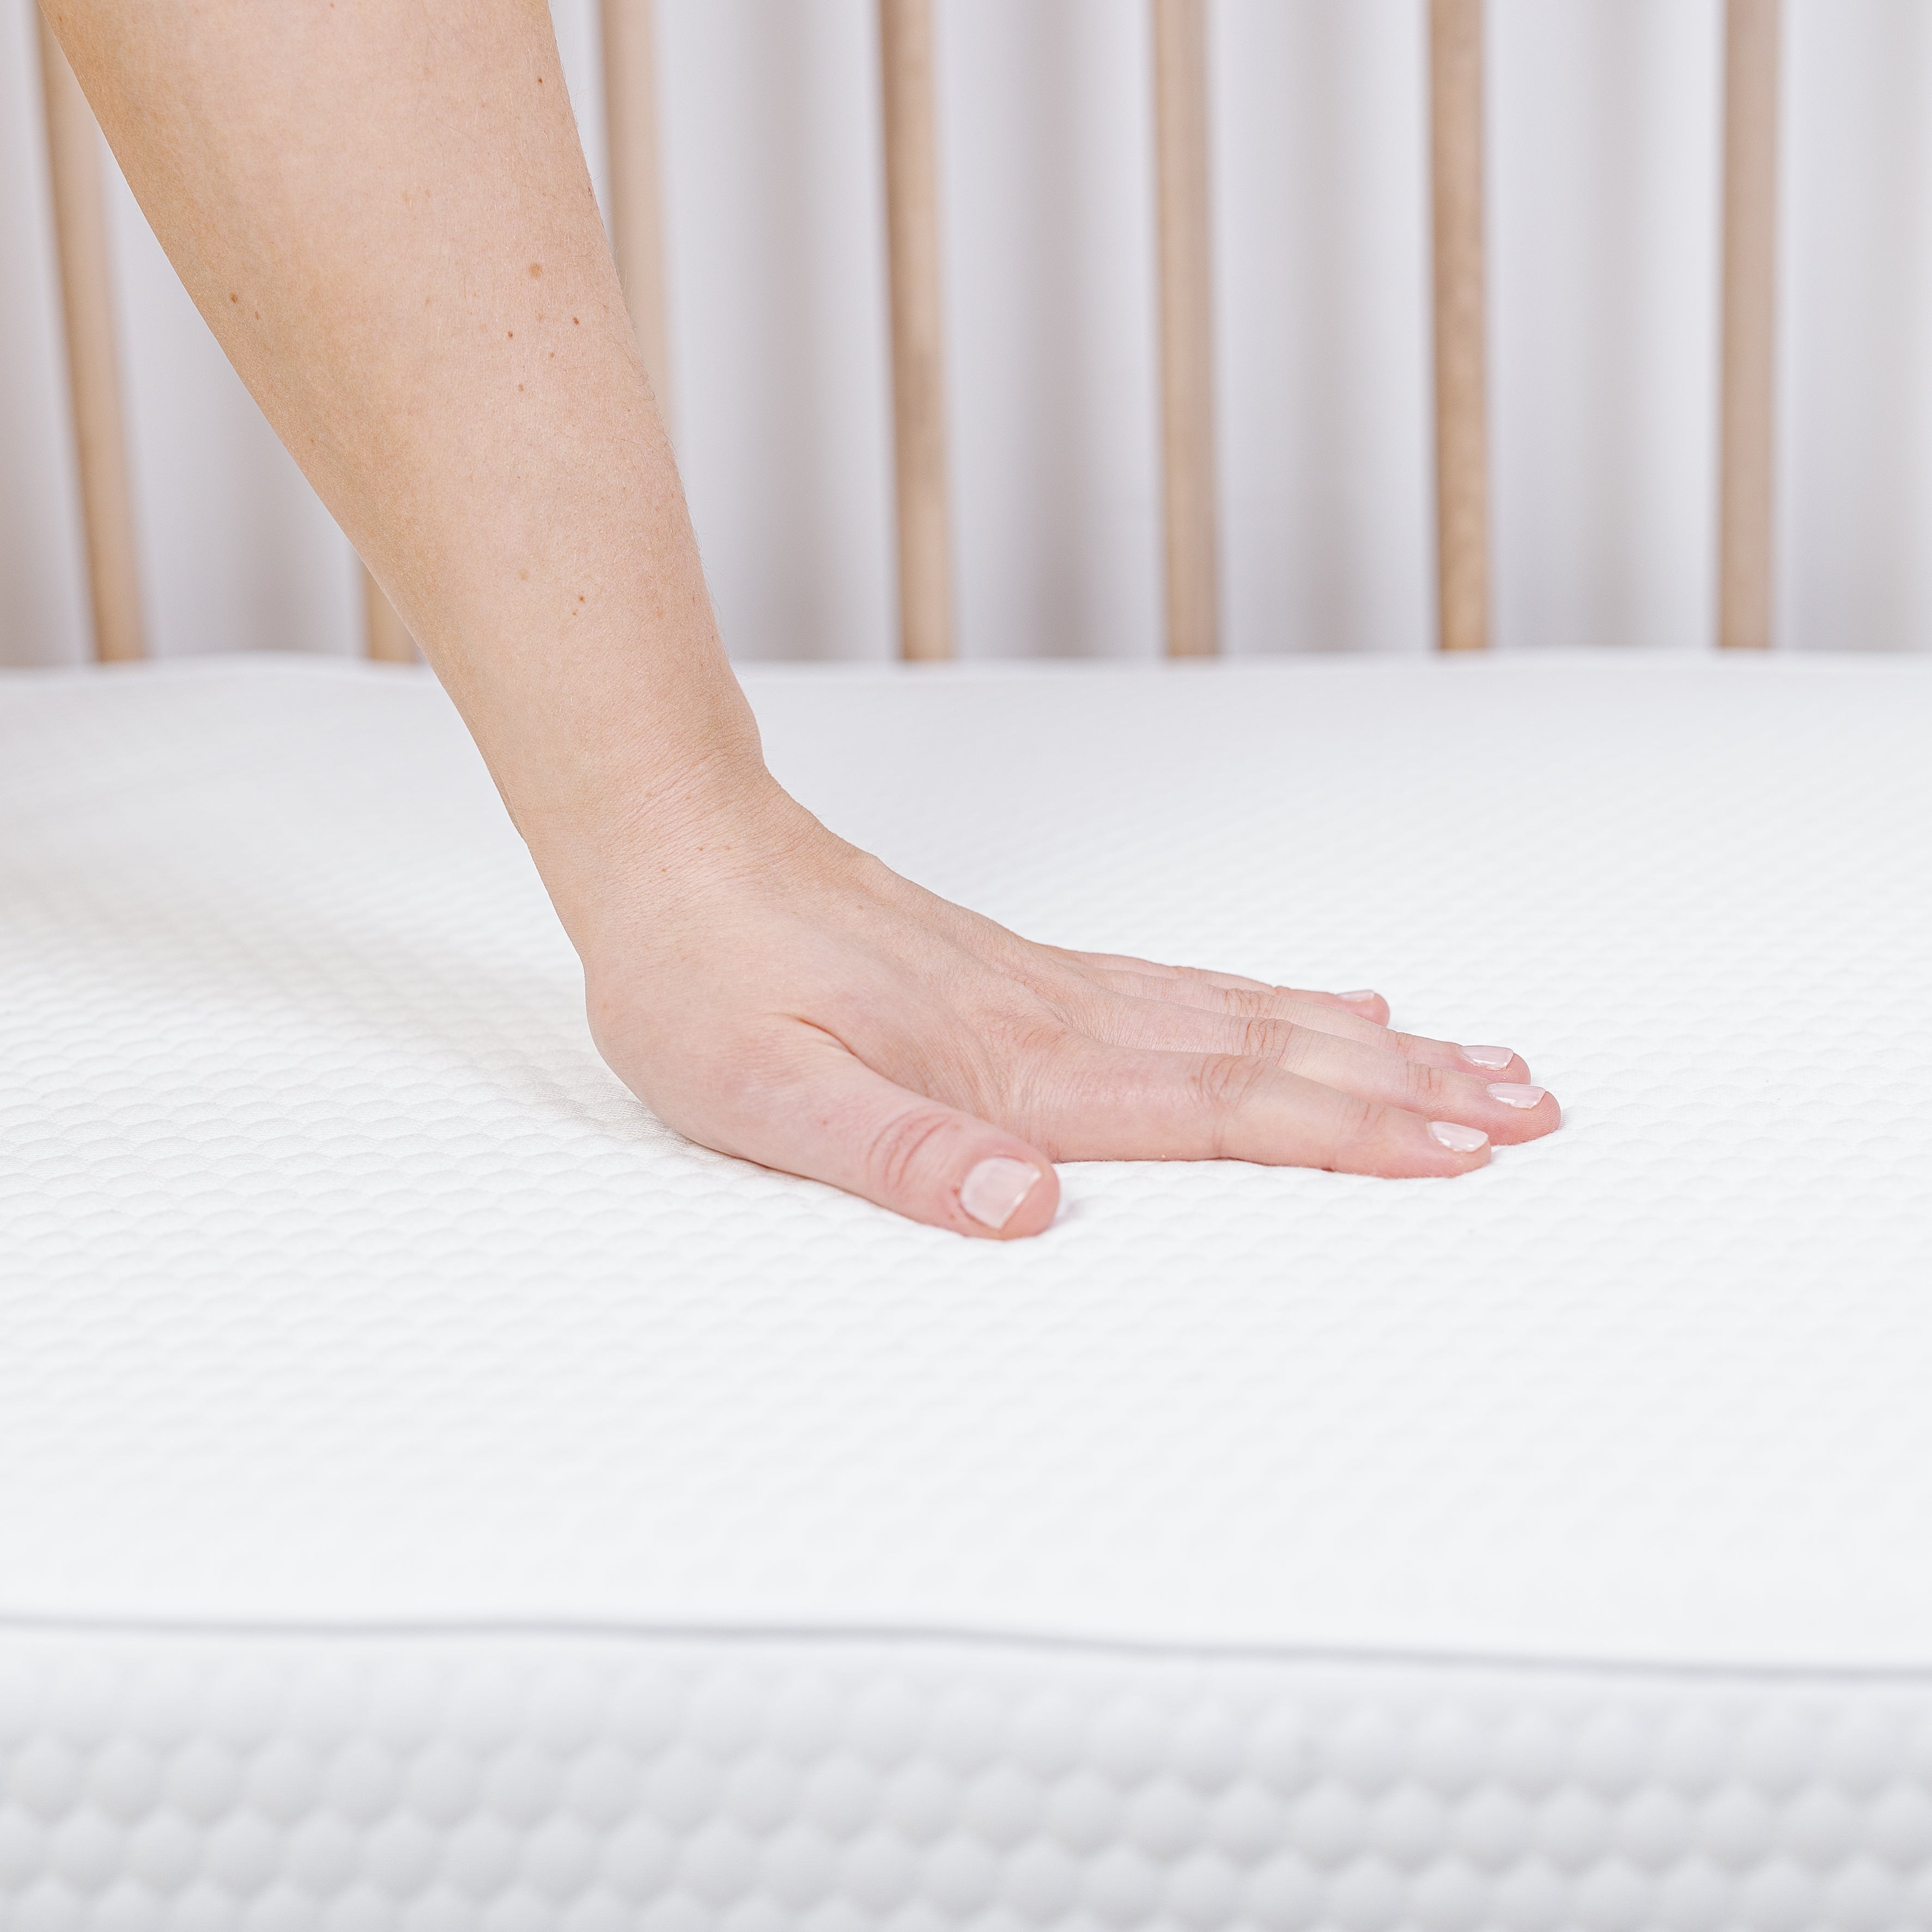 Tiny Dreamer Deluxe™ - Organic Coconut & Pocket Sprung Core Cot Mattress To Fit SNUZKOT (117 x 68cm) - The Tiny Bed Company™